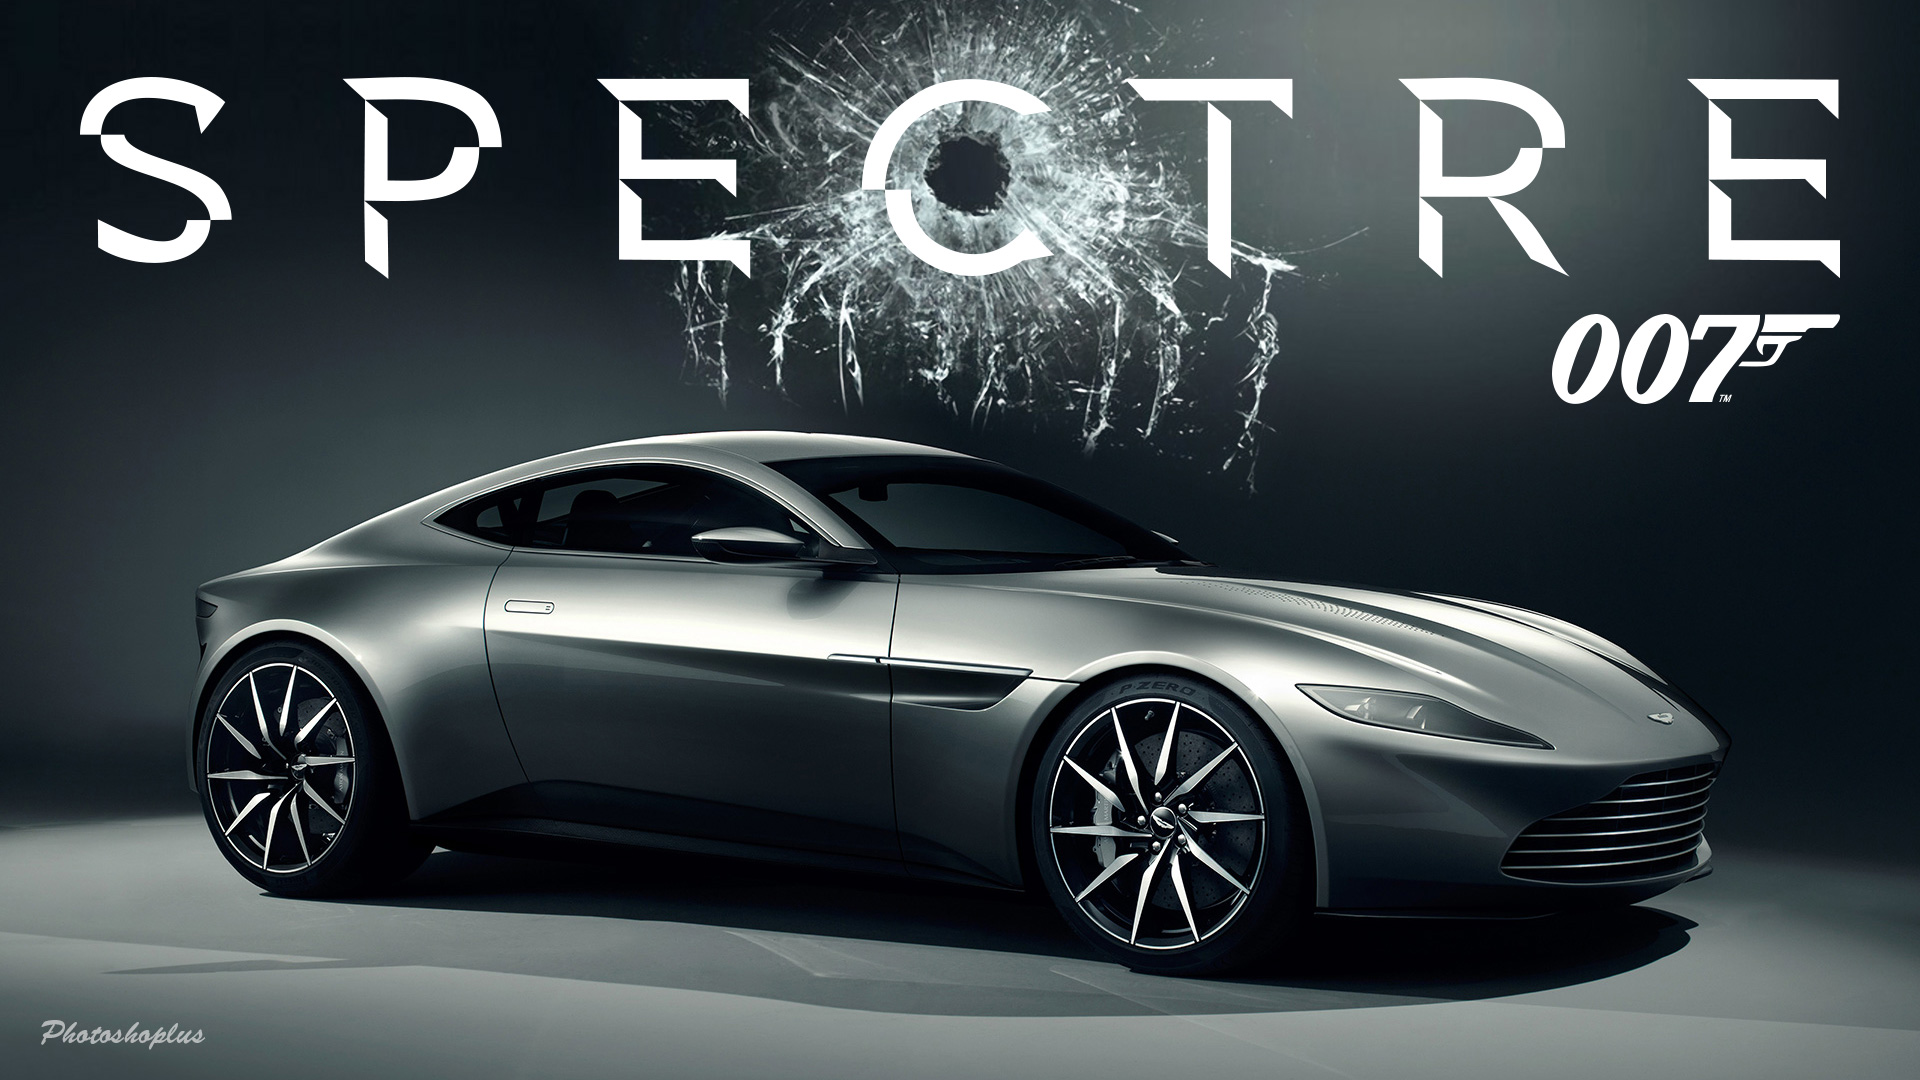 spectre bond meaning